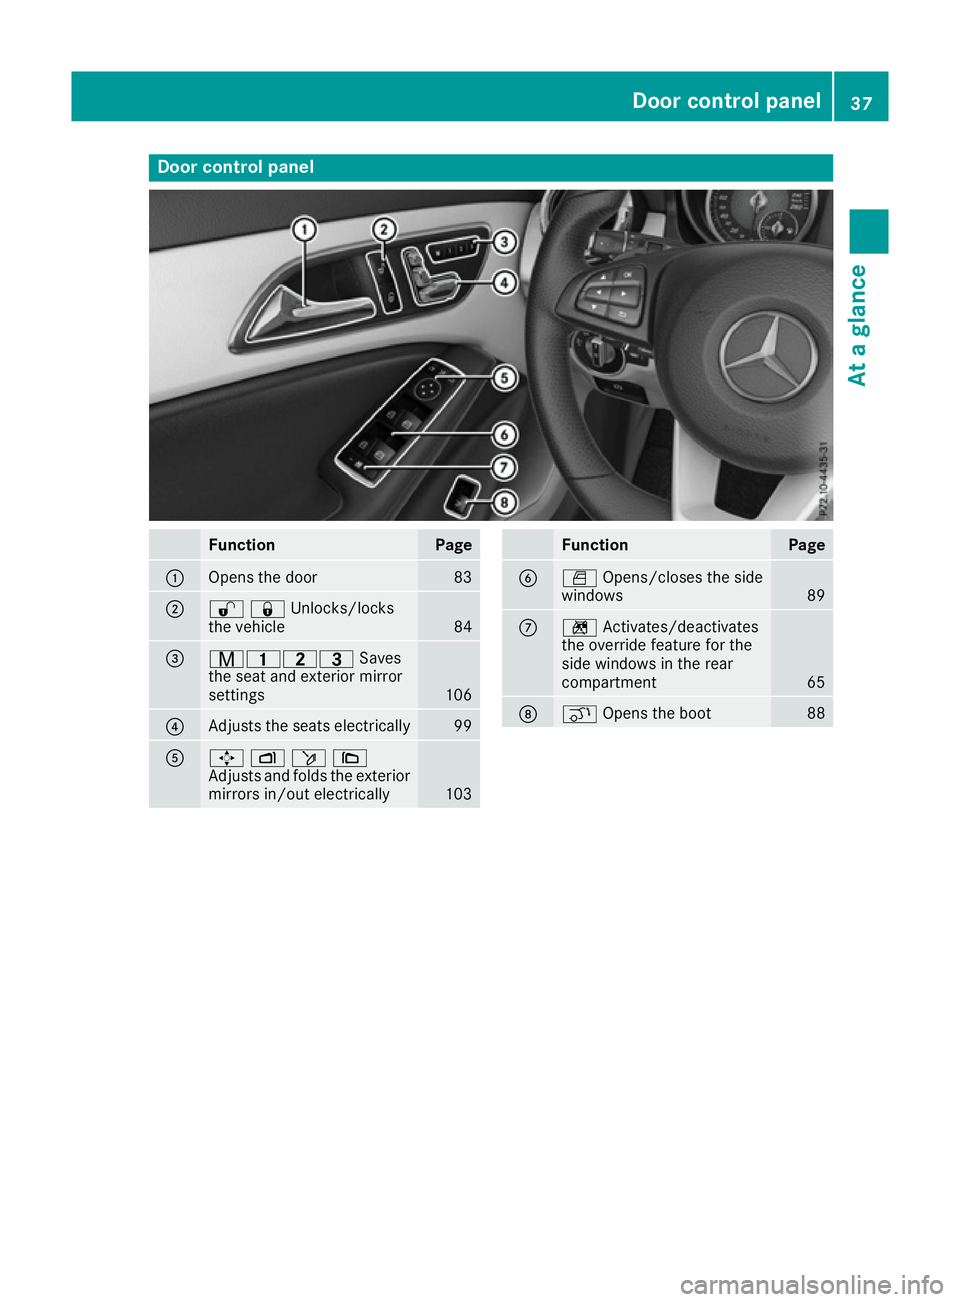 MERCEDES-BENZ CLA COUPE 2016  Owners Manual Door control panel
Function Page
:
Opens the door 83
;
%&Unlocks/locks
the vehicle
84
=
r45=
Saves
the seat and exterior mirror
settings 106
?
Adjusts the seats electrically 99
A
7
Zö\
Adjusts and fo